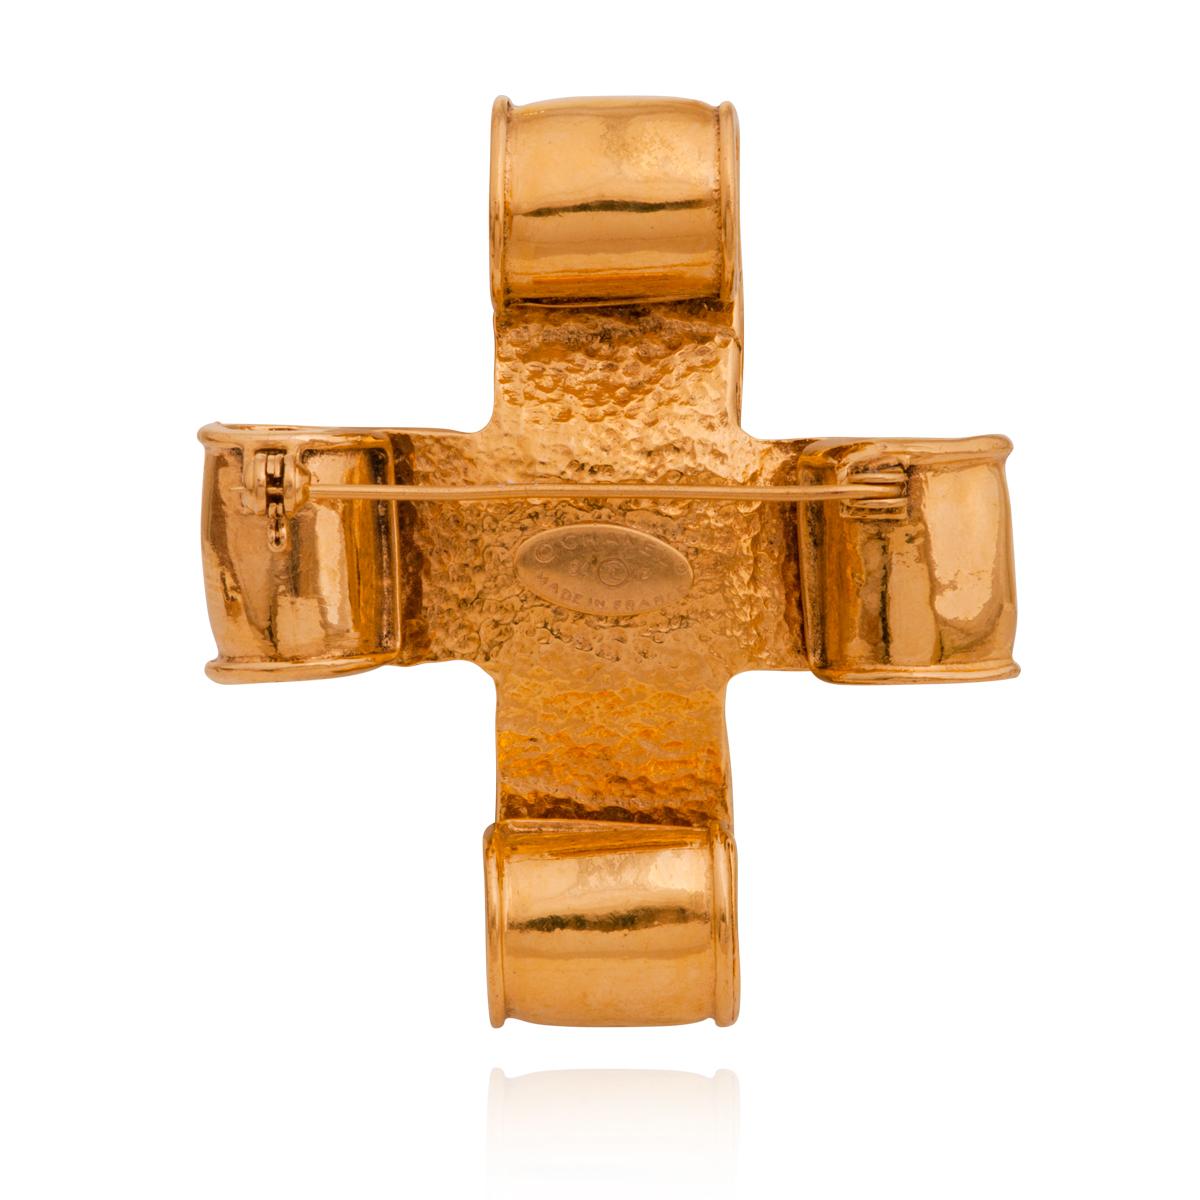 Vintage Chanel 94P gold-tone CC Logo scroll cross pin brooch, made in France, 1994.

The brooch is from the Chanel Spring 1994 Collection, it is cross-shaped with scrolling detail and rolled smooth edges, featuring as well the CC logo at the center.